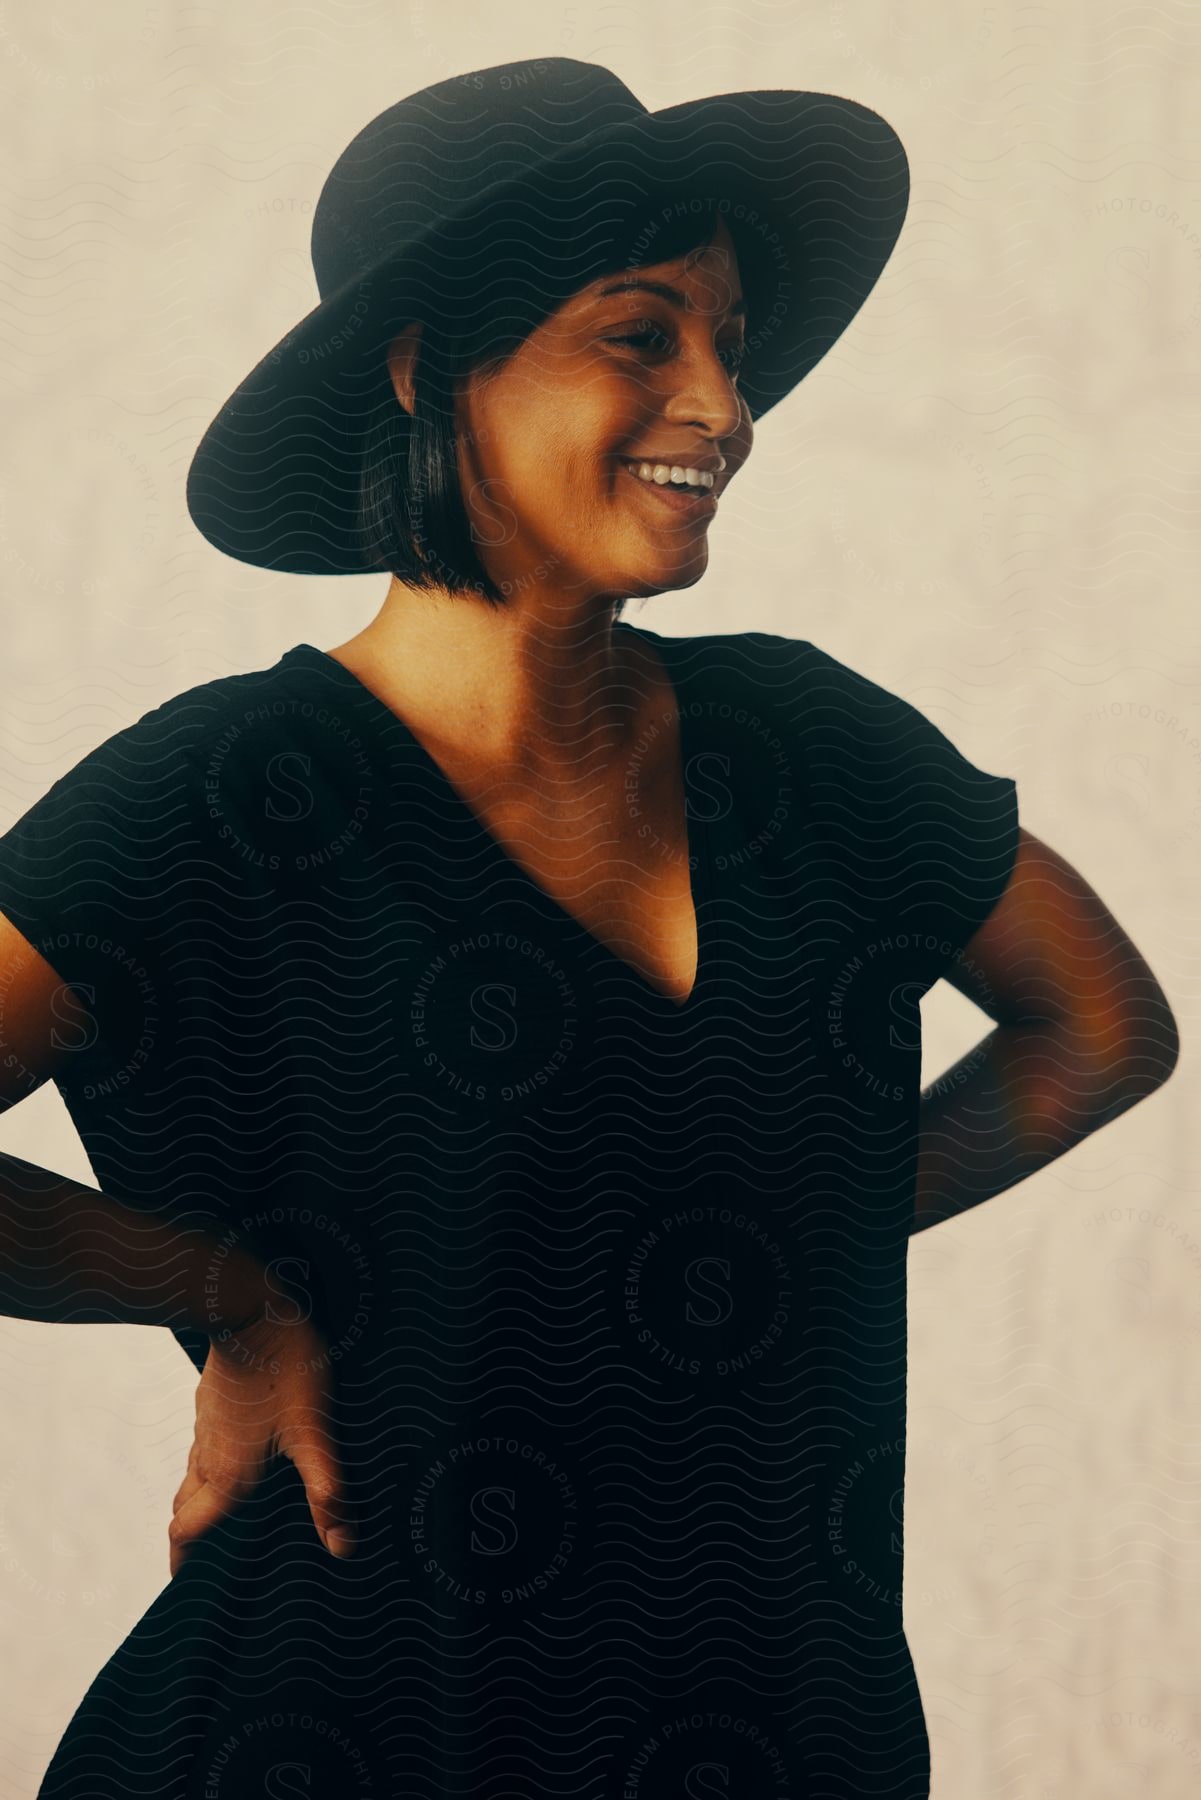 Smiling woman in black hat and clothes poses against a white background